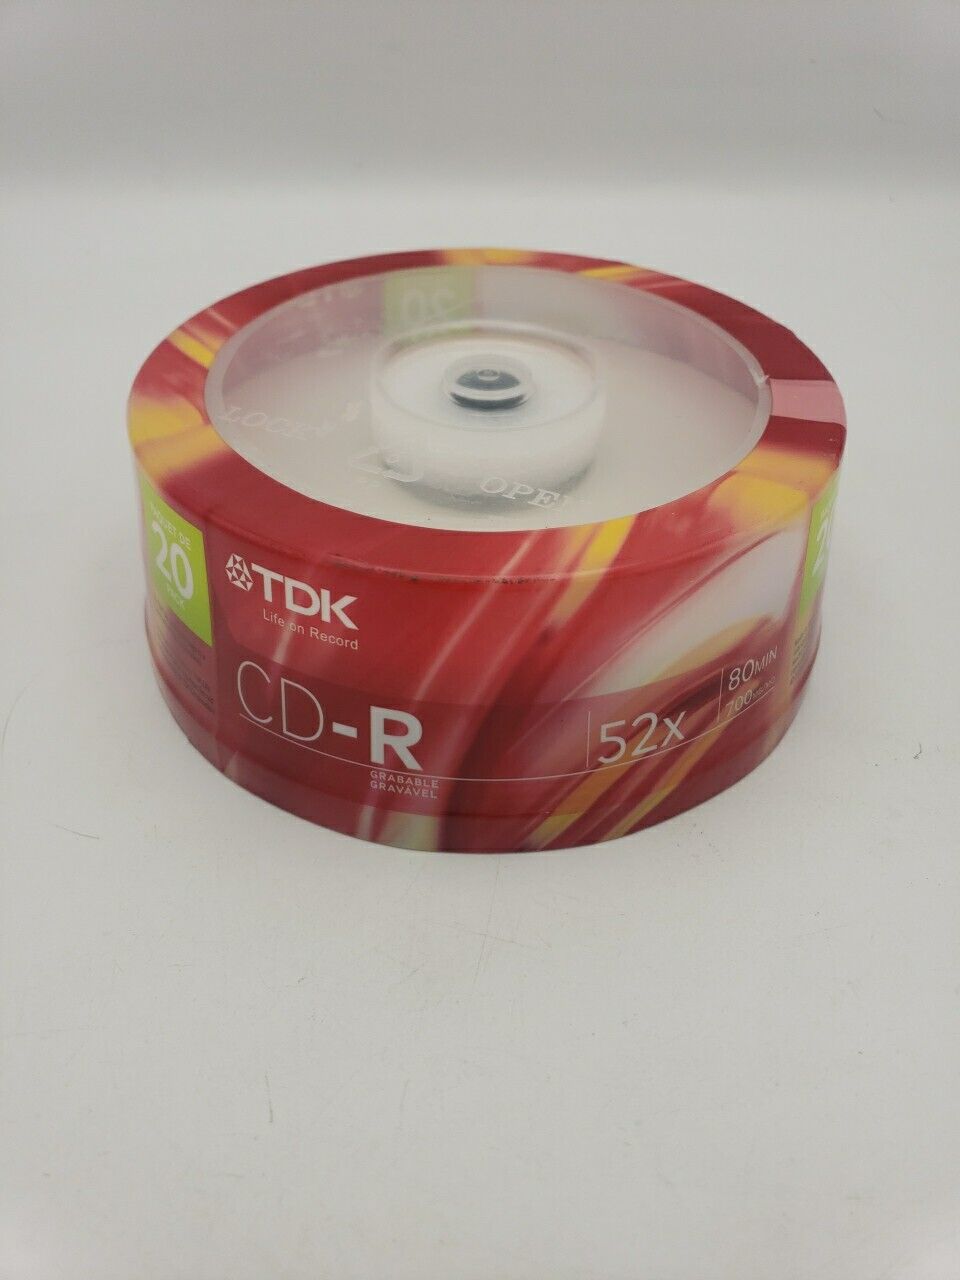 TDK CD-R 52x 20-Pack 80MIN 700MB Blank CDs Audio, Data - NEW & FACTORY SEALED